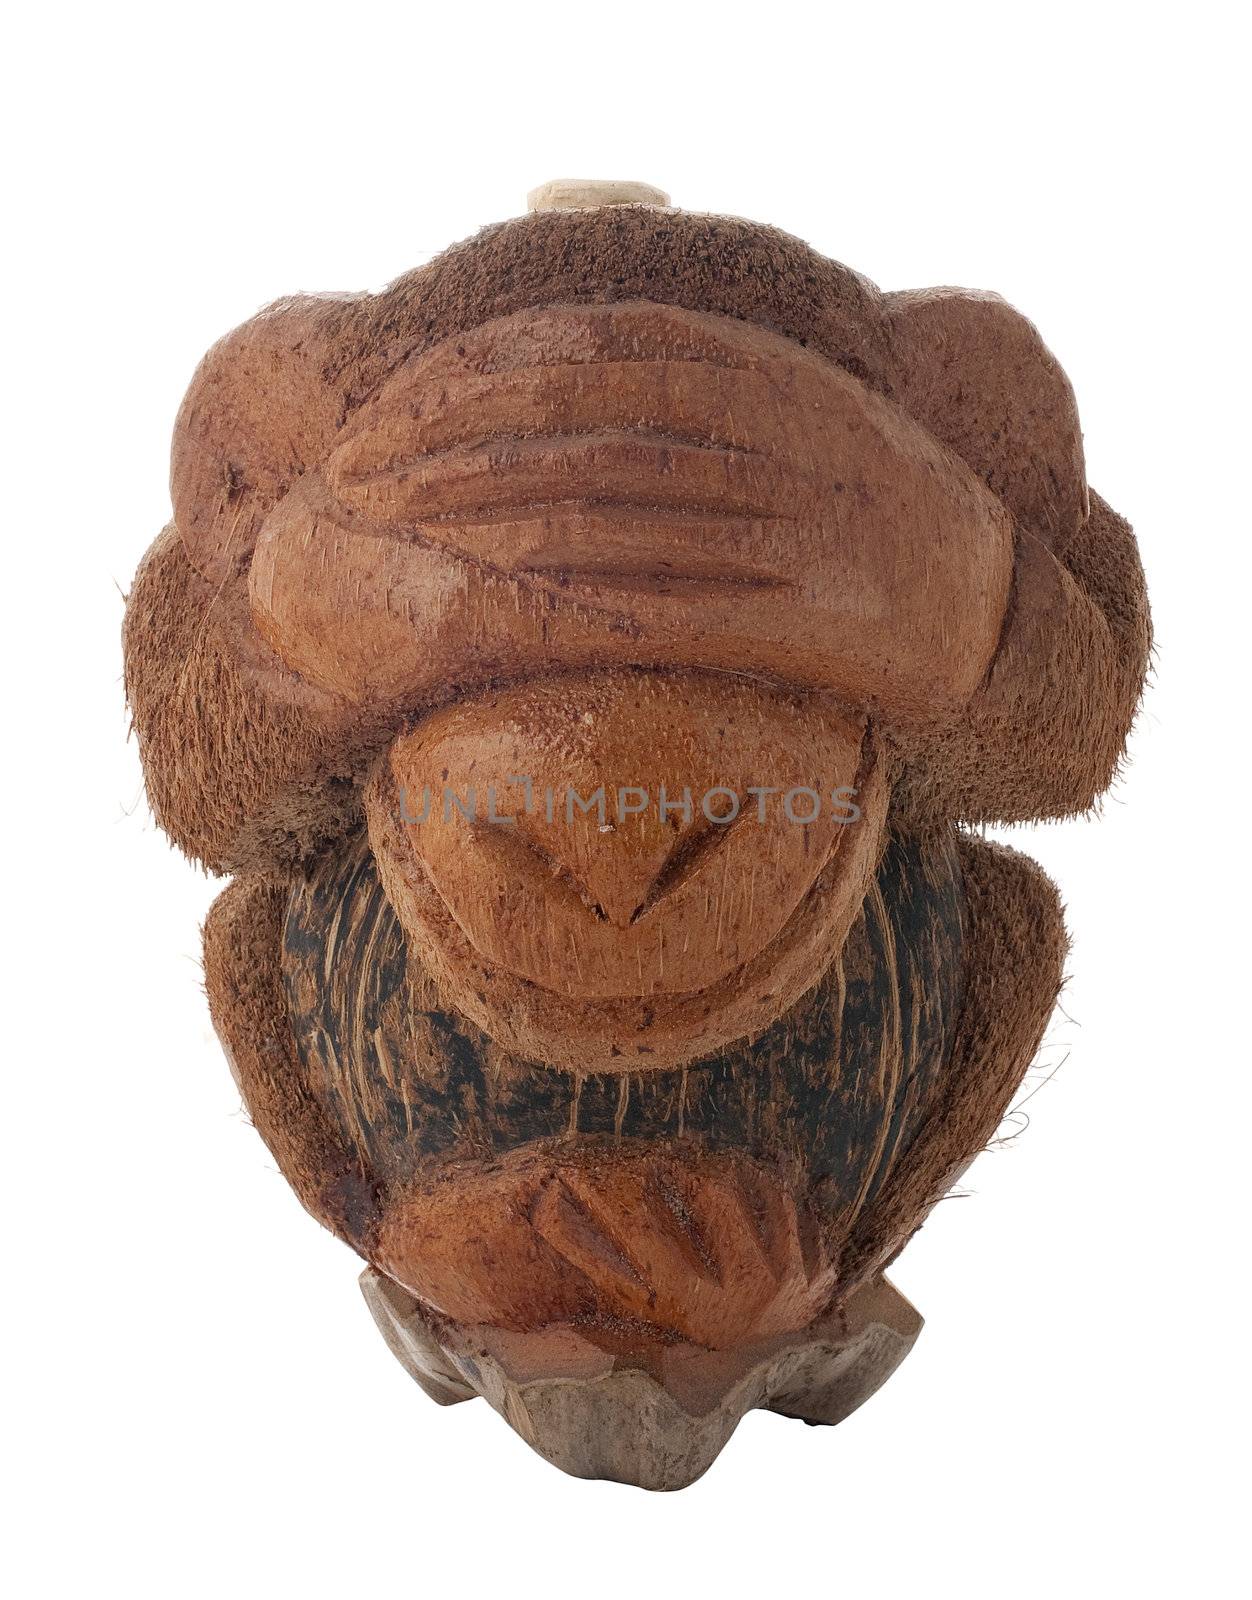 Bottle carved from a coconut in the shape of a ashamed monkey isolated from the white background.